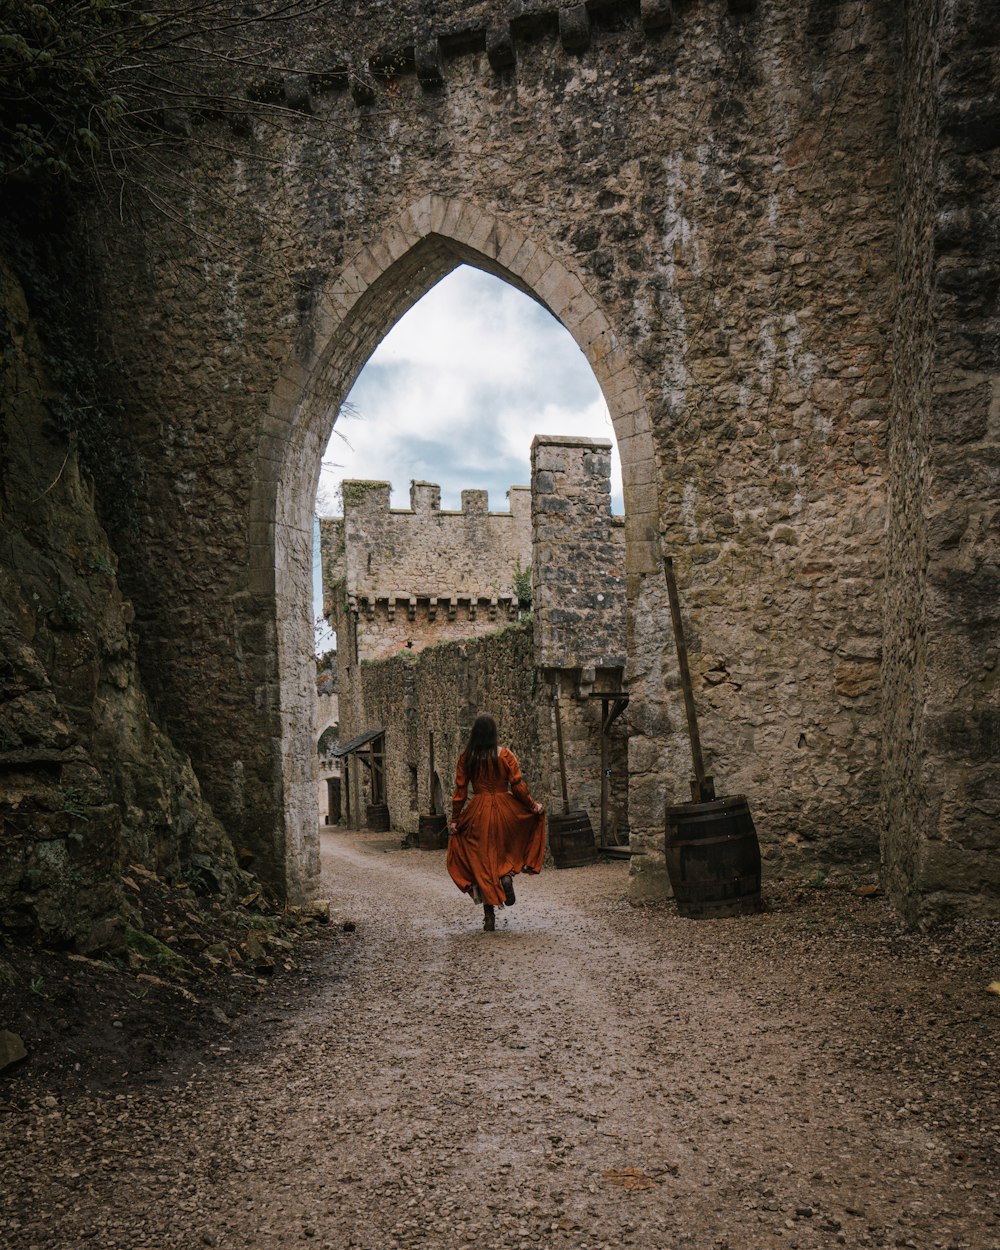 a woman in a red dress is walking through an archway